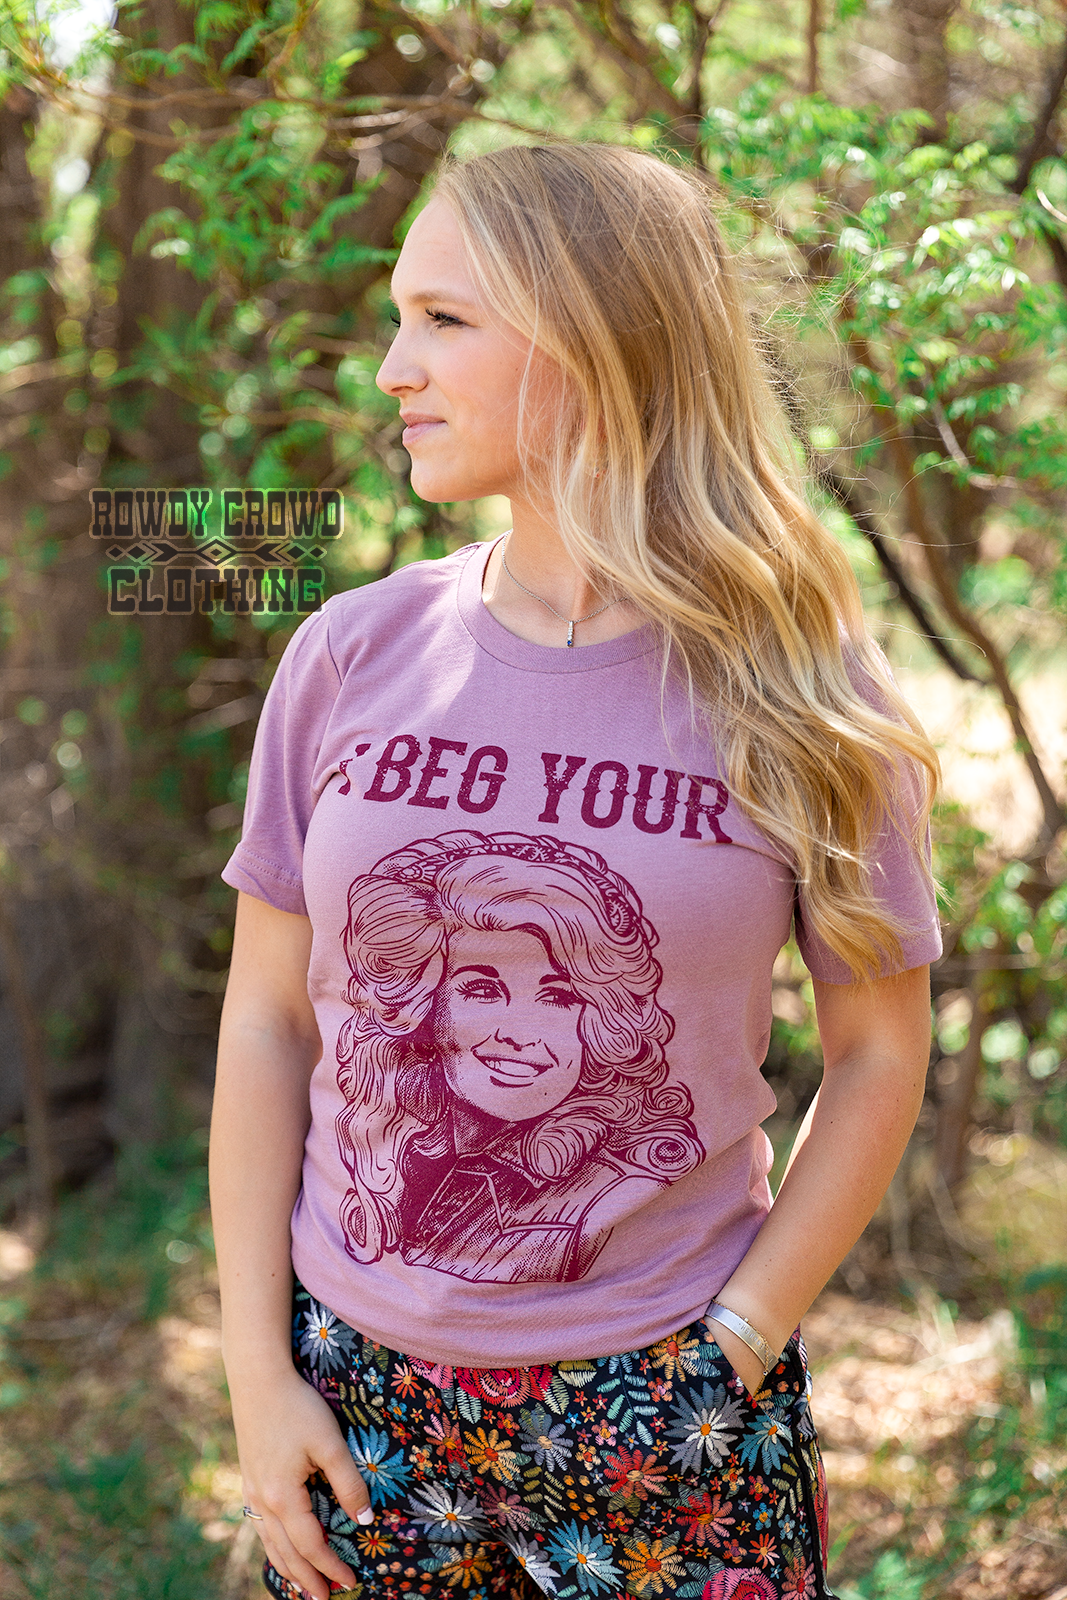 western apparel, western graphic tee, graphic western tees, wholesale clothing, western wholesale, women's western graphic tees, wholesale clothing and jewelry, western boutique clothing, western women's graphic tee, dolly parton, dolly graphic tee, dolly tee, dolly parton graphic tee, I beg you parton